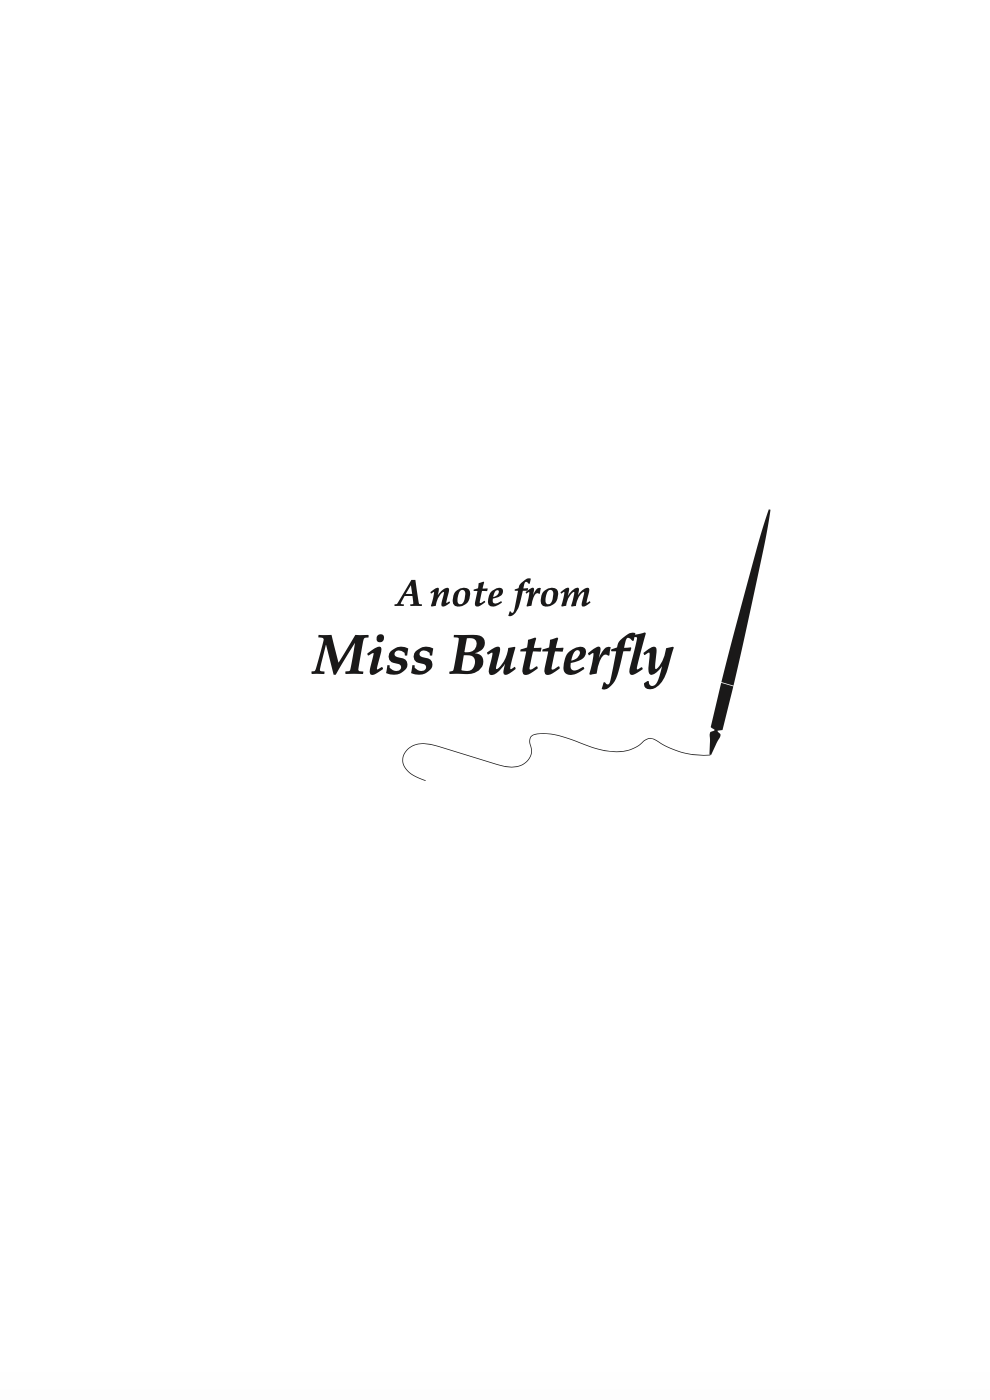 Title page from the book "Unmasking Depression", black text on a white page that reads: "A note from Miss Butterfly" with a pen illustration next to it.